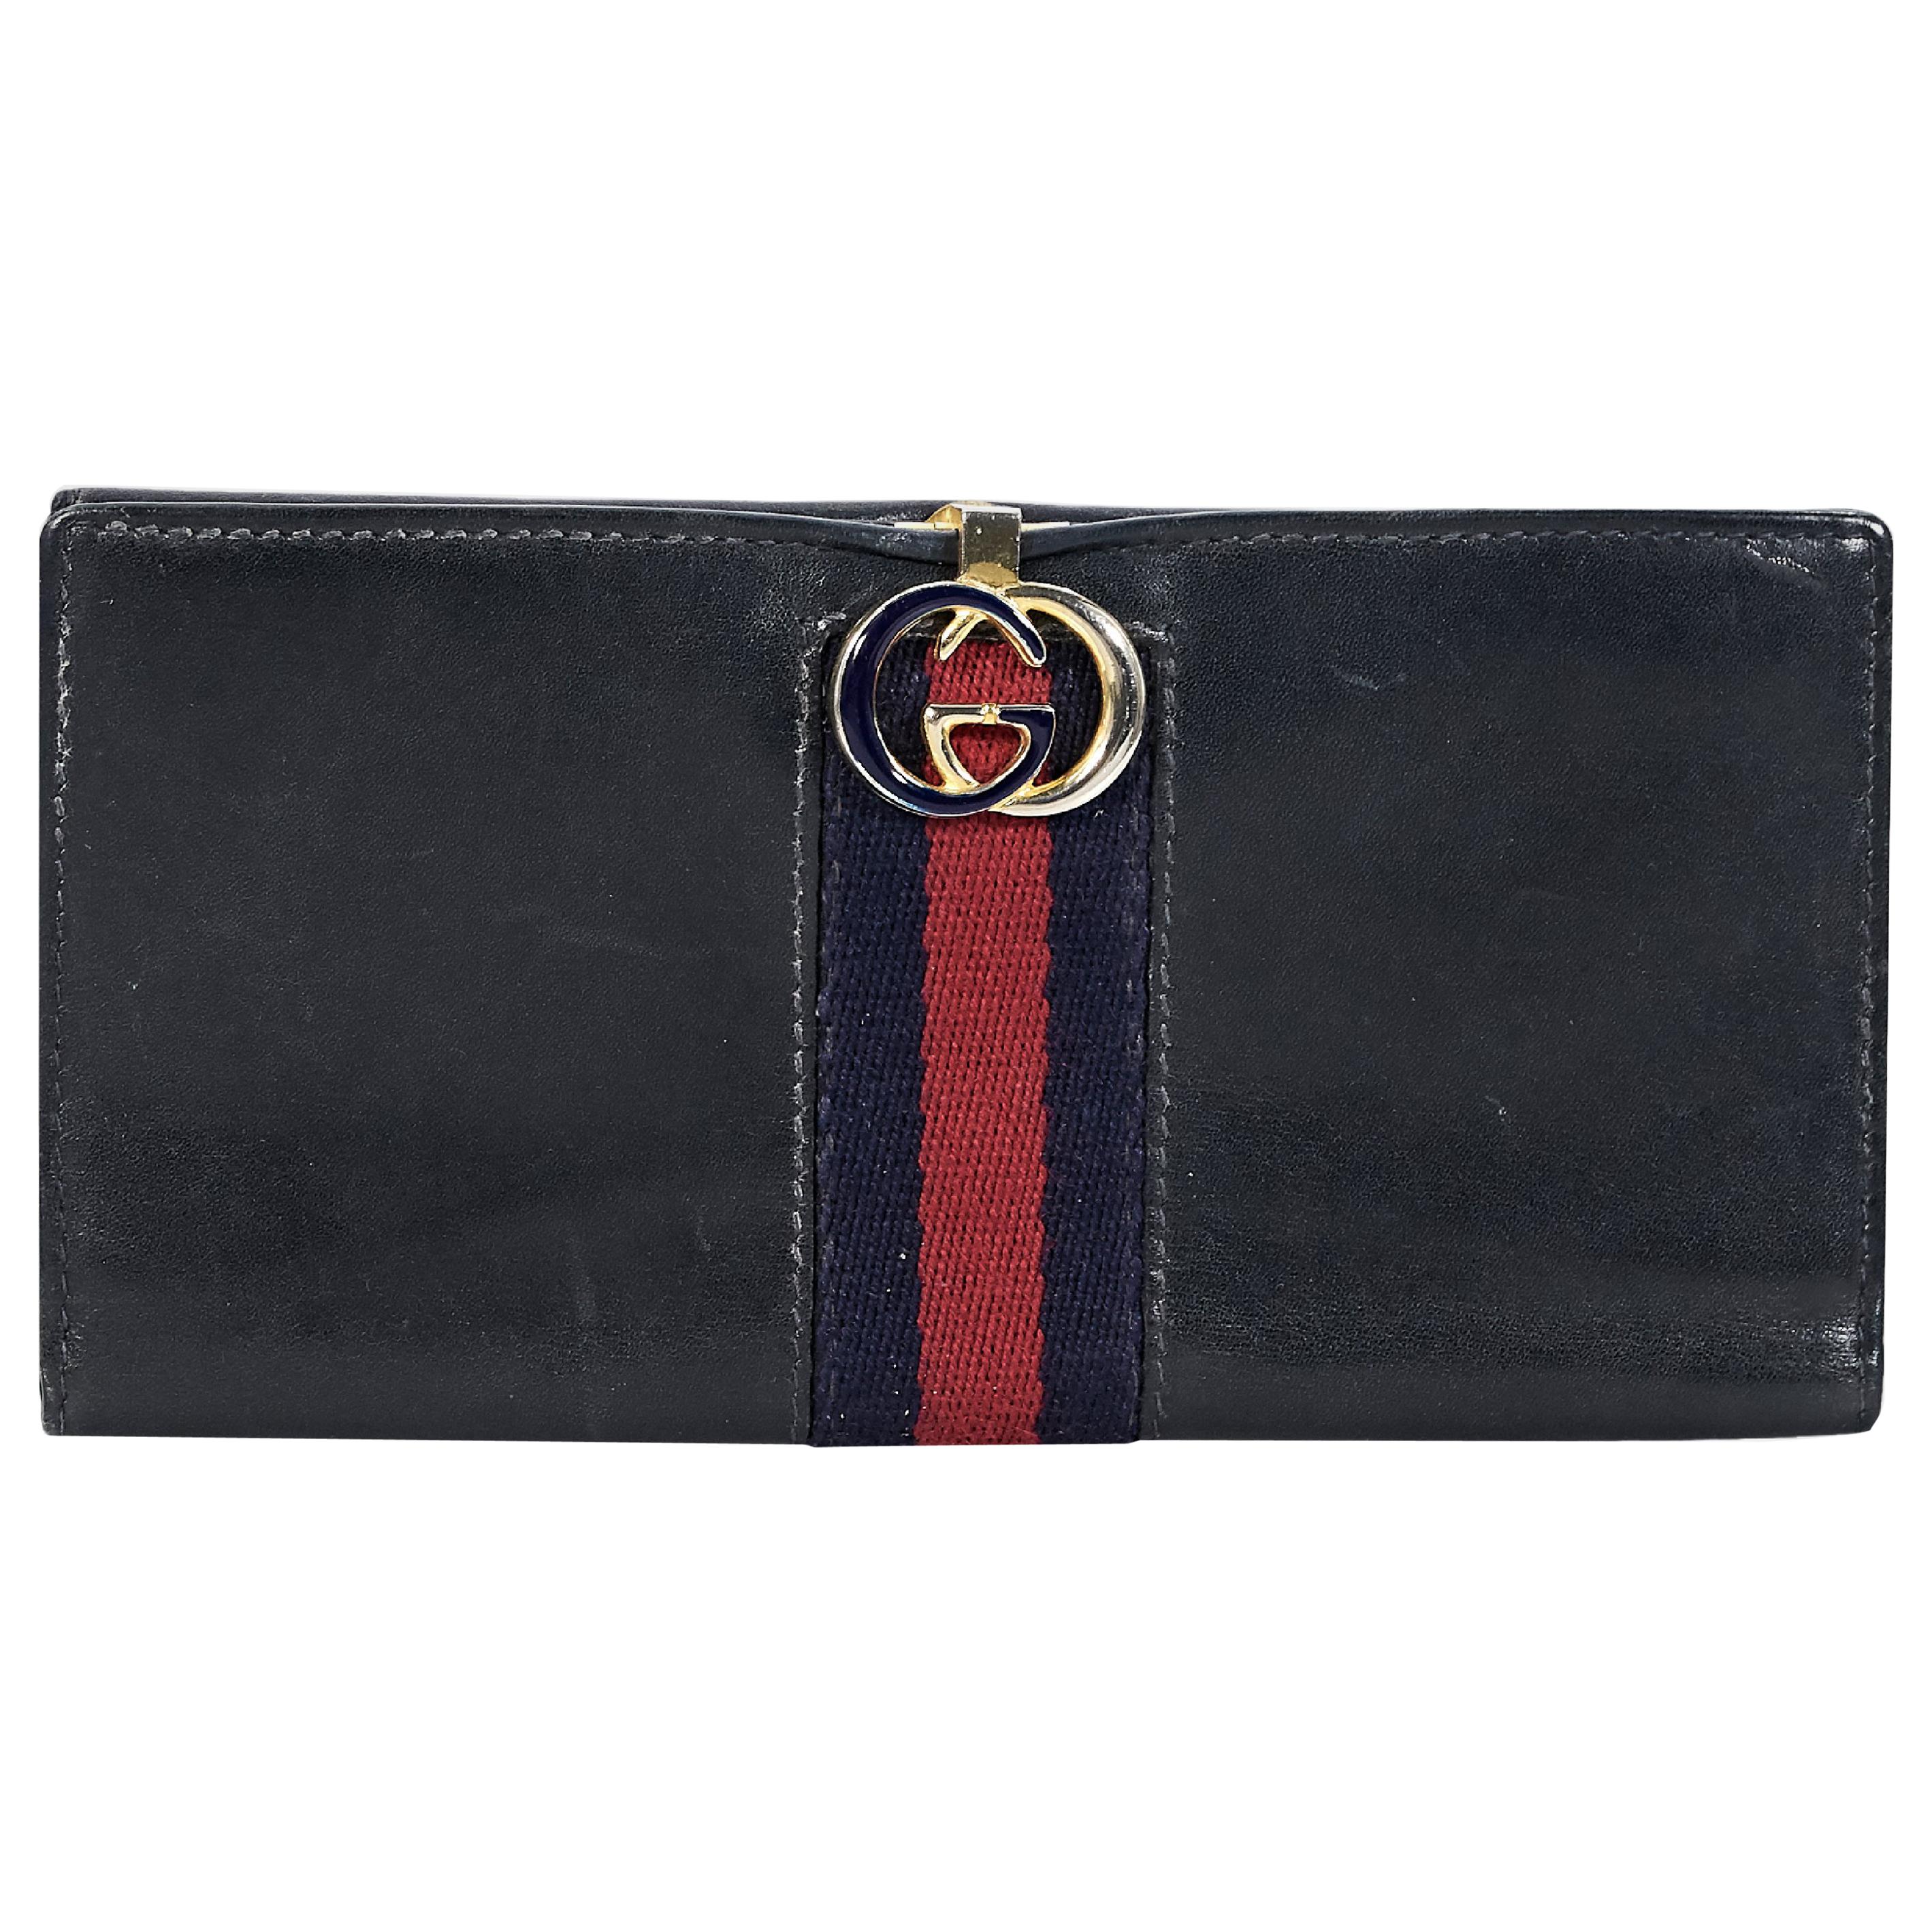 Navy Blue Vintage Gucci Leather Wallet